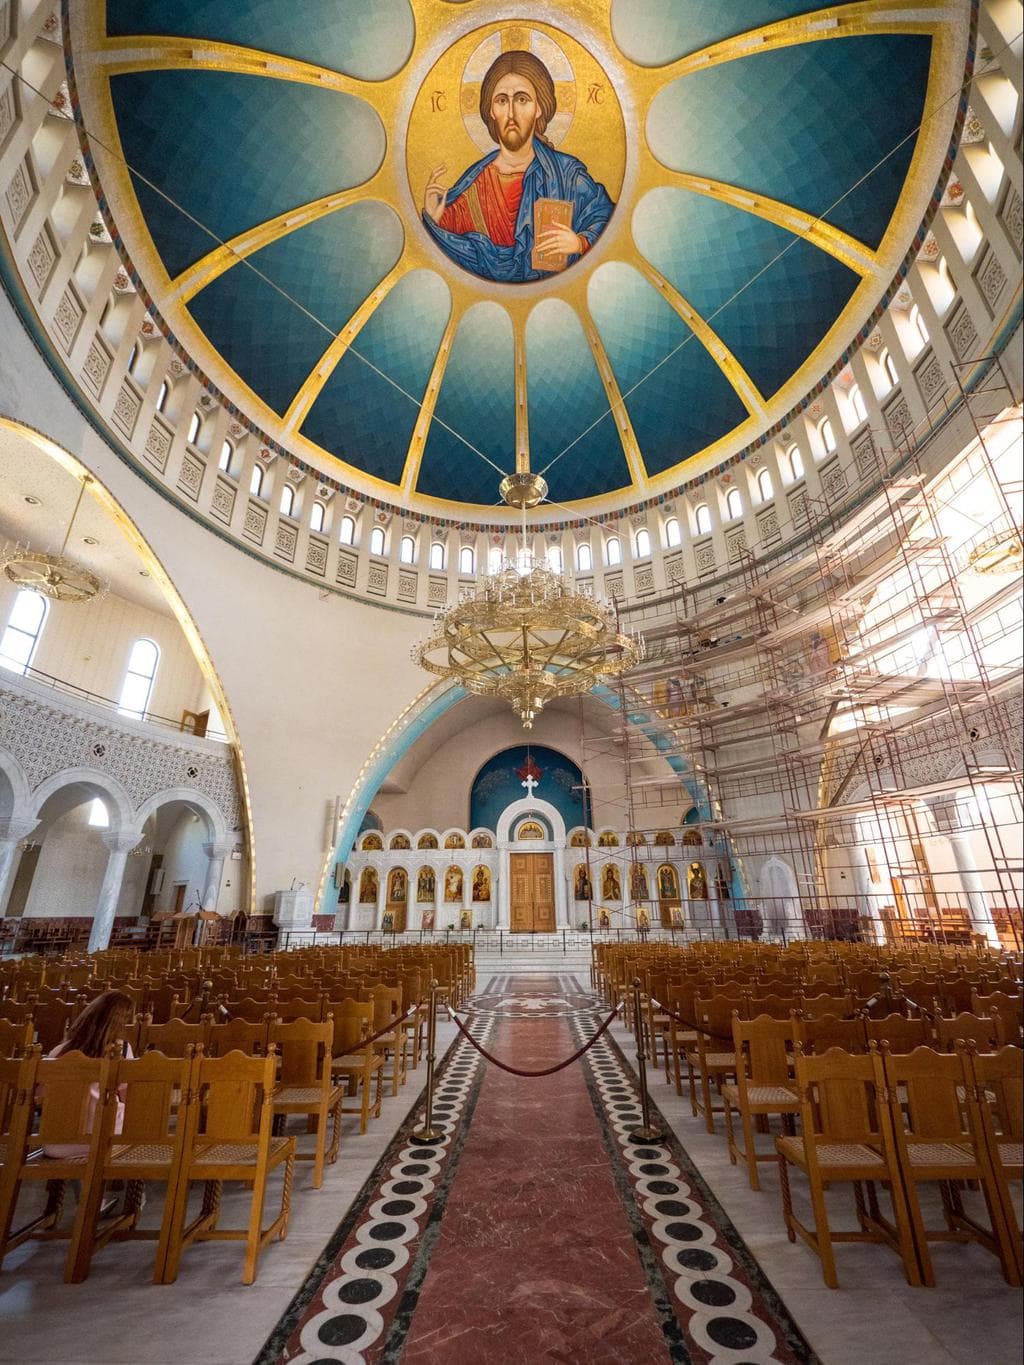 The dome murals inside the Resurrection of Christ Orthodox Cathedral in Tirana